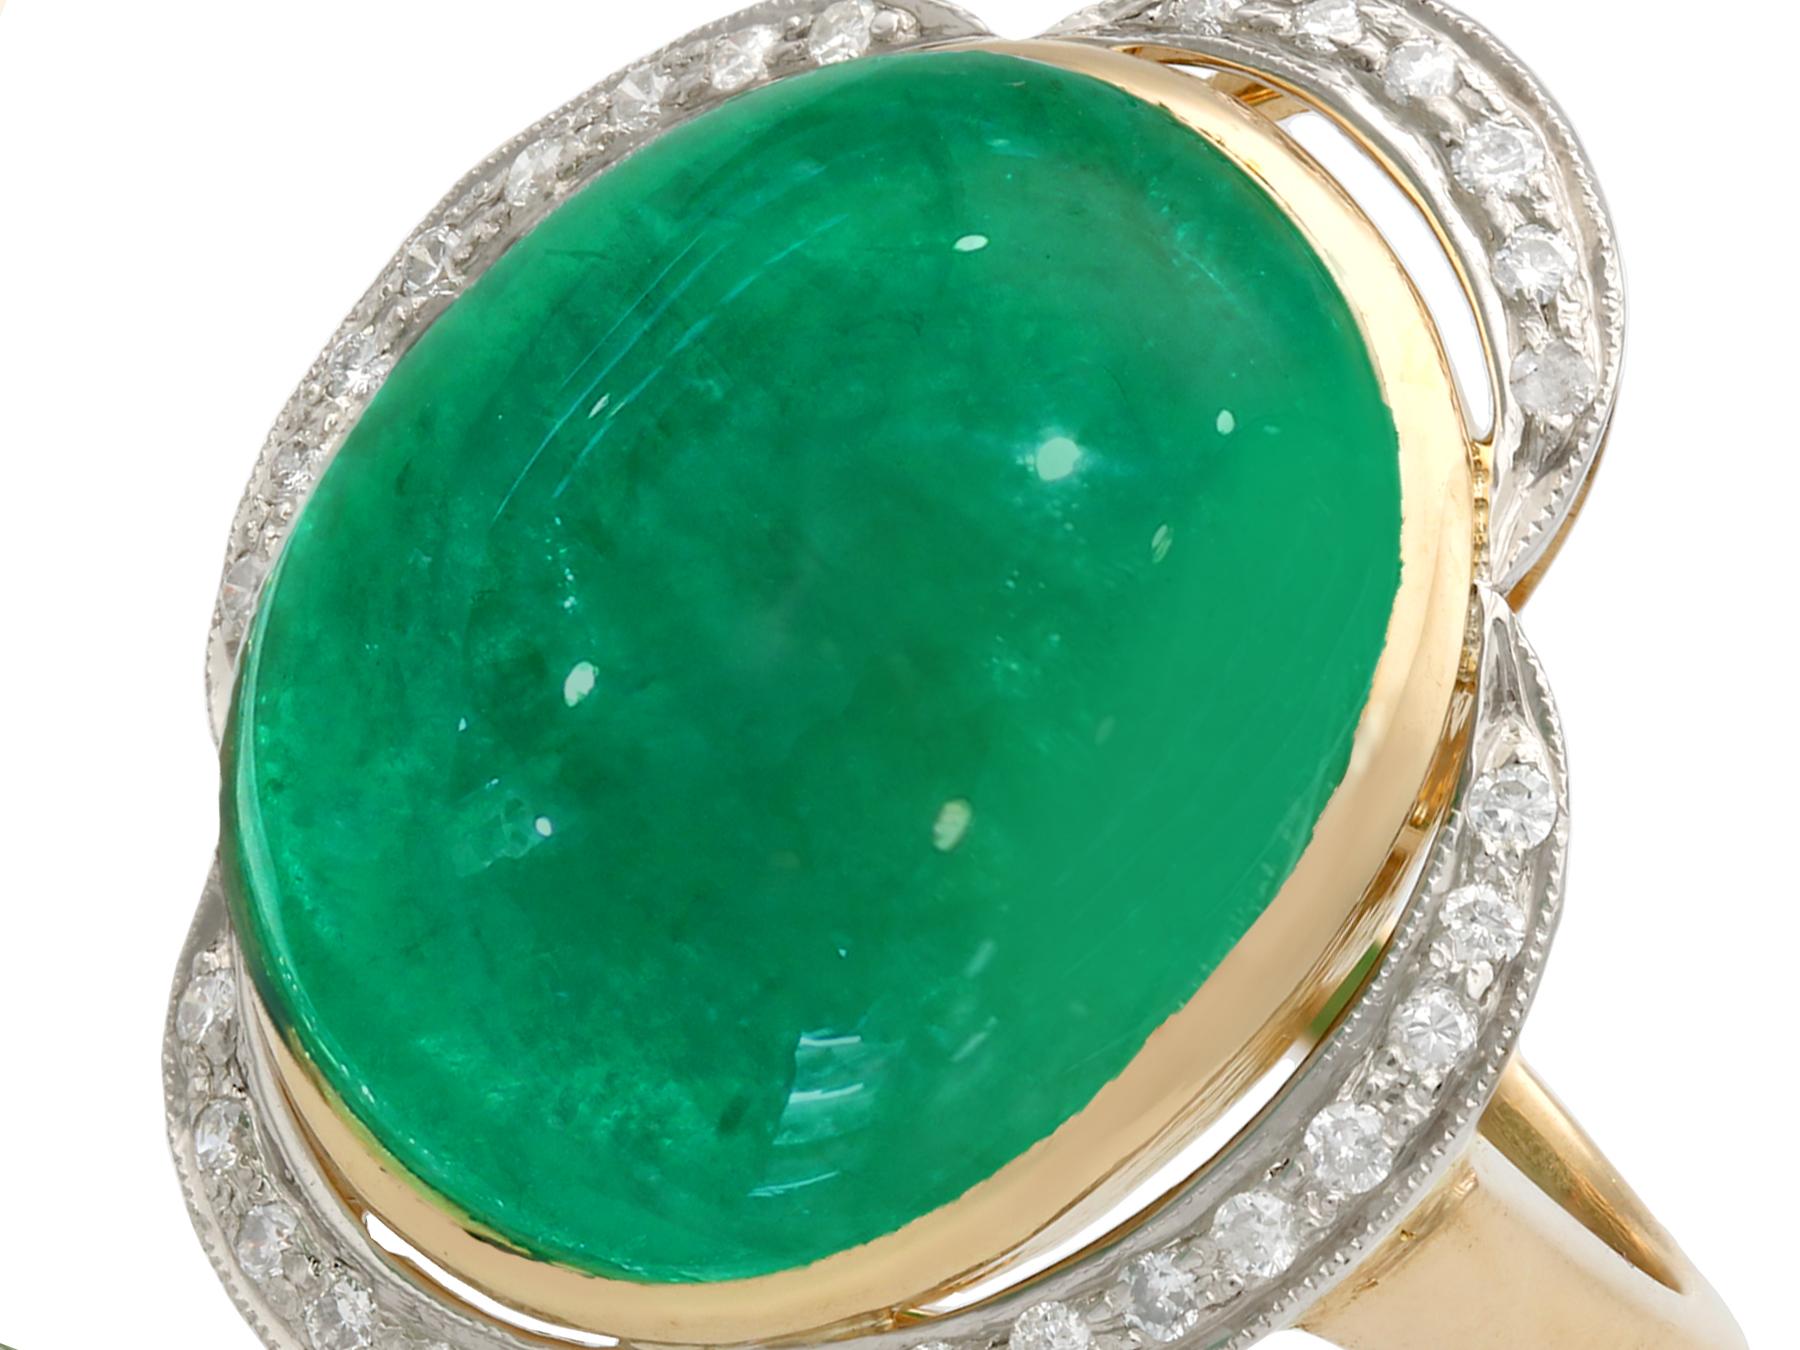 Vintage 1940s 14.5ct Cabochon Cut Emerald and Diamond Yellow Gold Cocktail Ring In Excellent Condition For Sale In Jesmond, Newcastle Upon Tyne